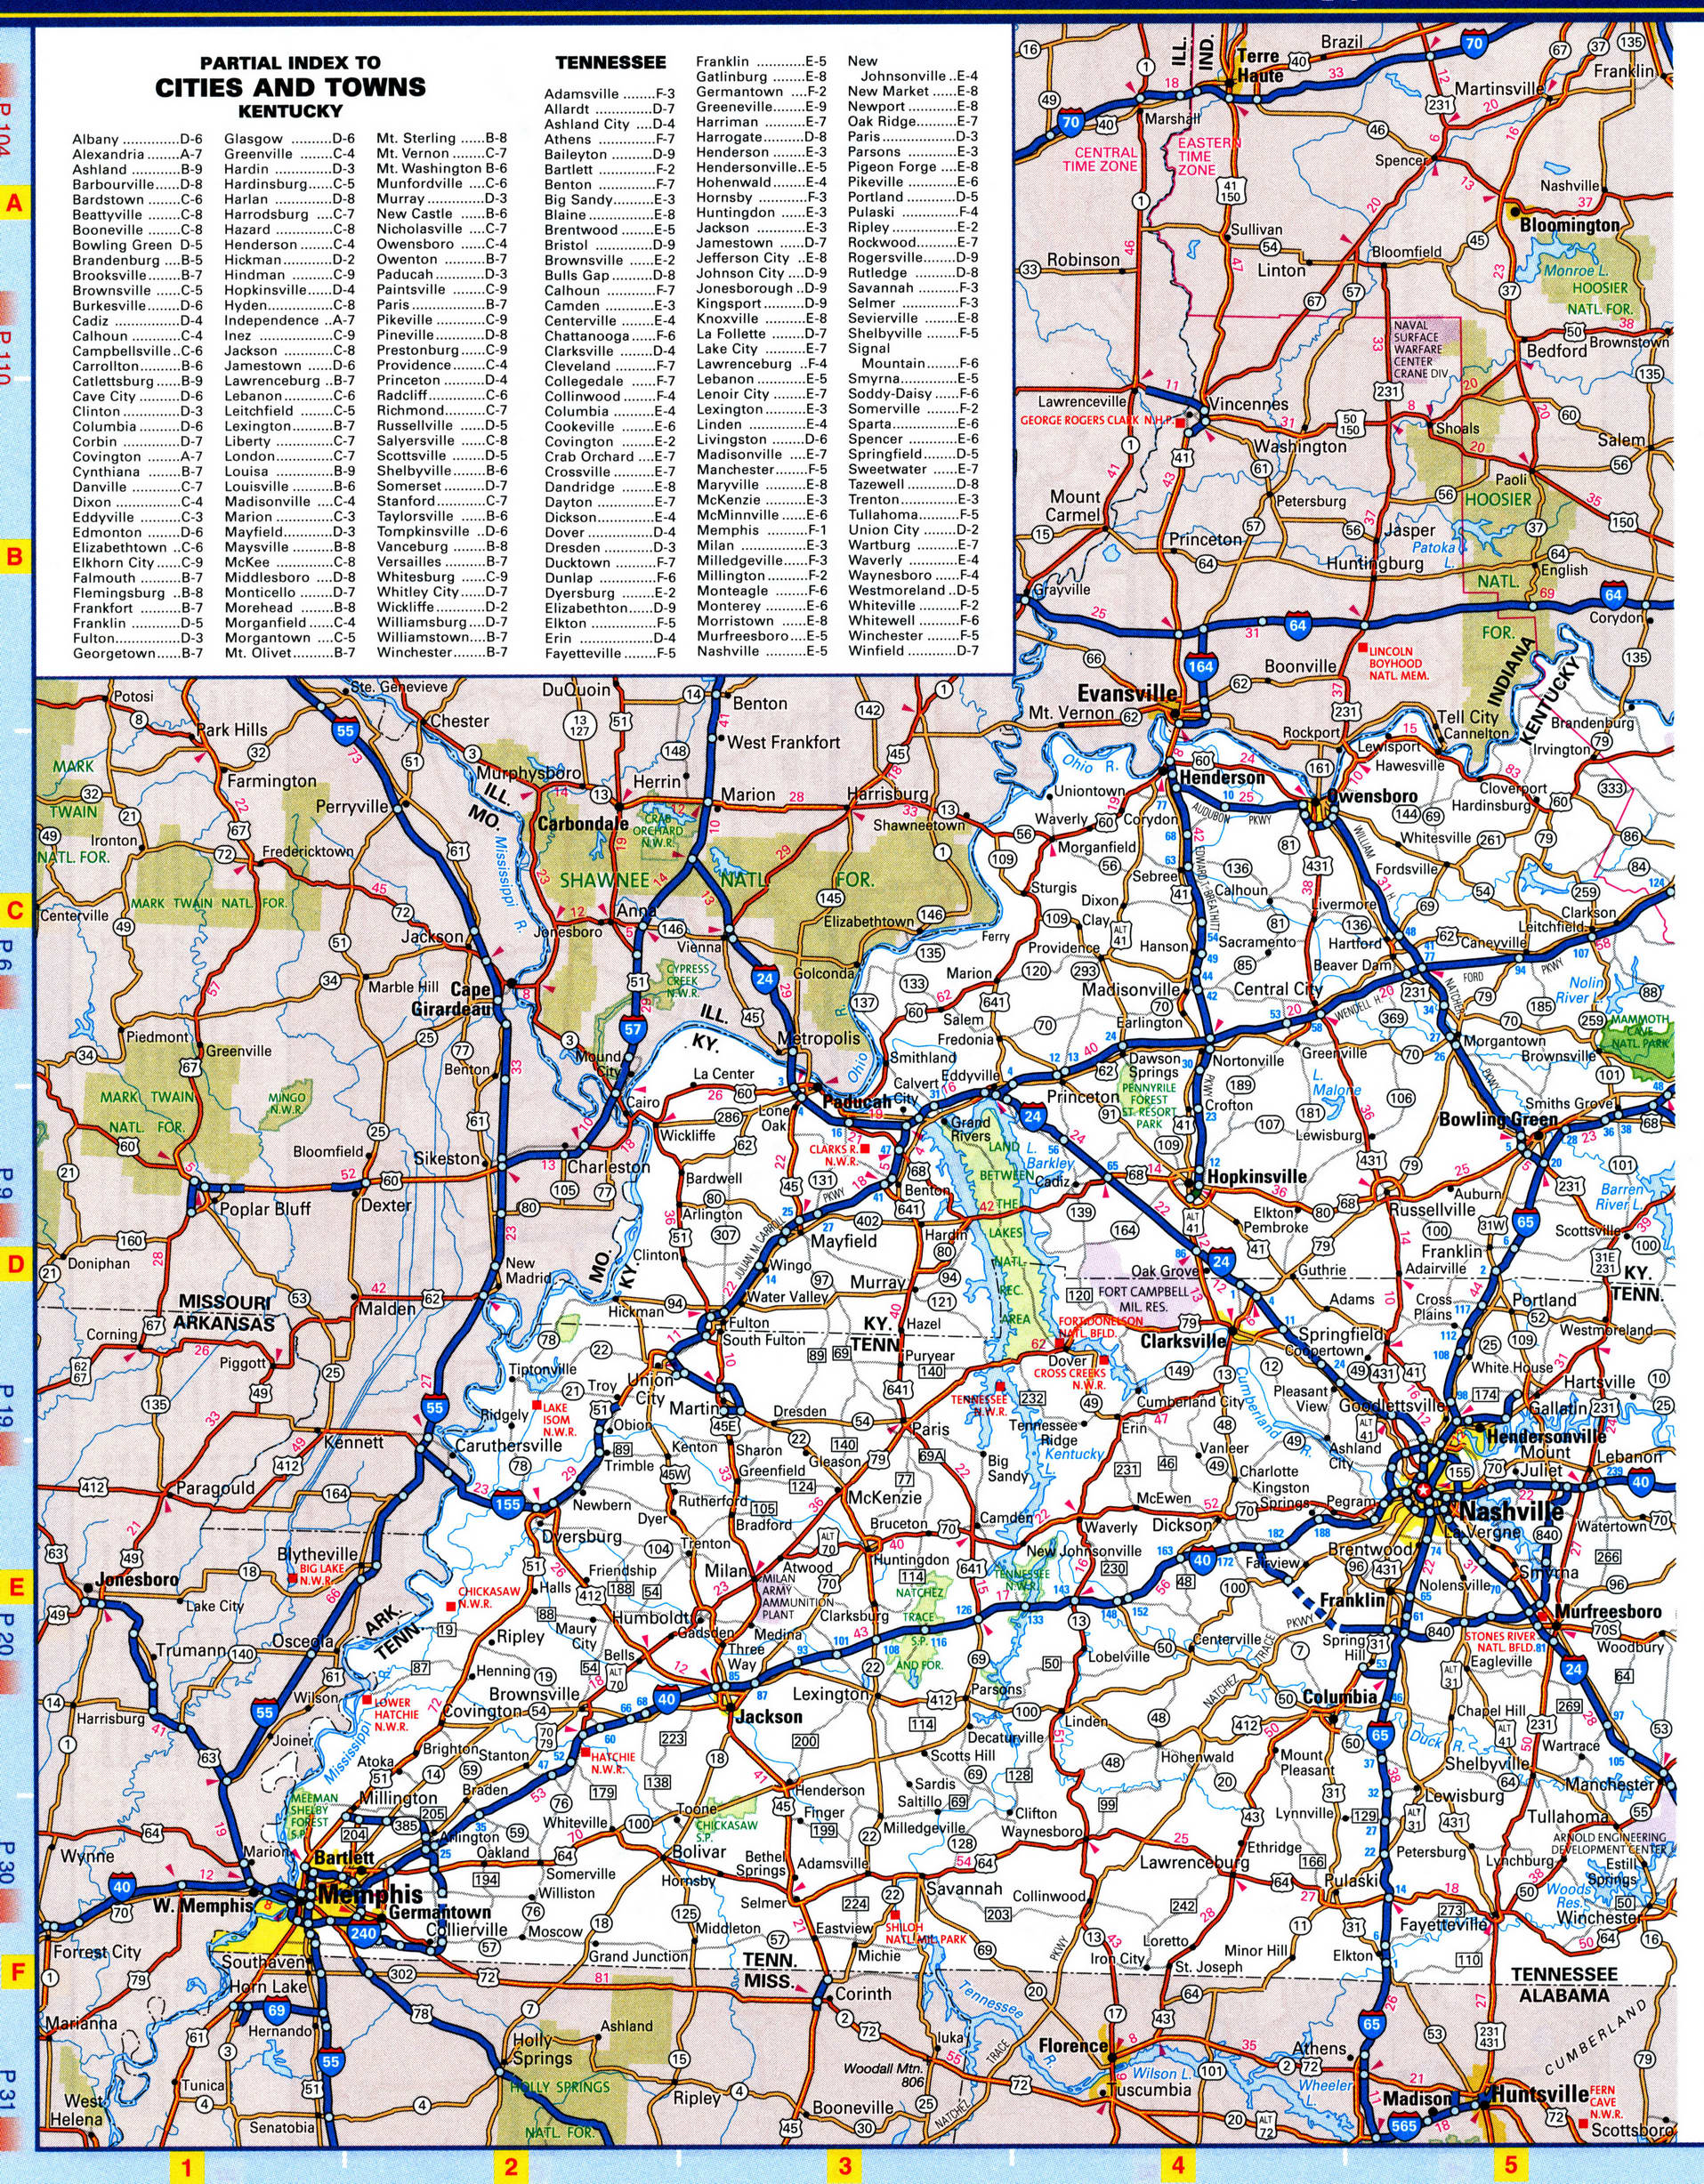 Tennessee highway map